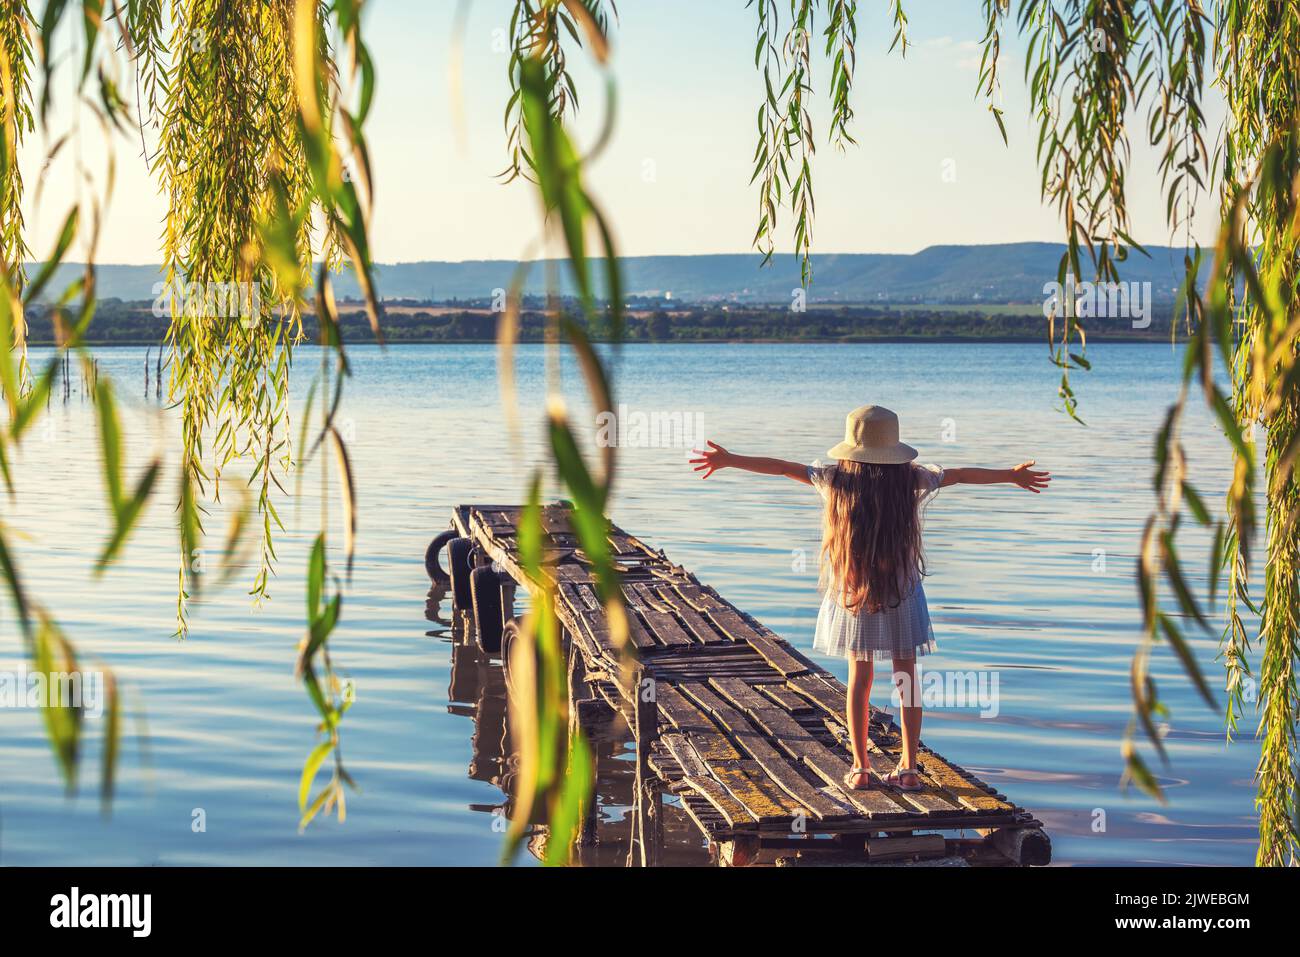 Girl on a old wooden fishing pier and willow tree enjoying beautiful sunset over the sea lake Stock Photo